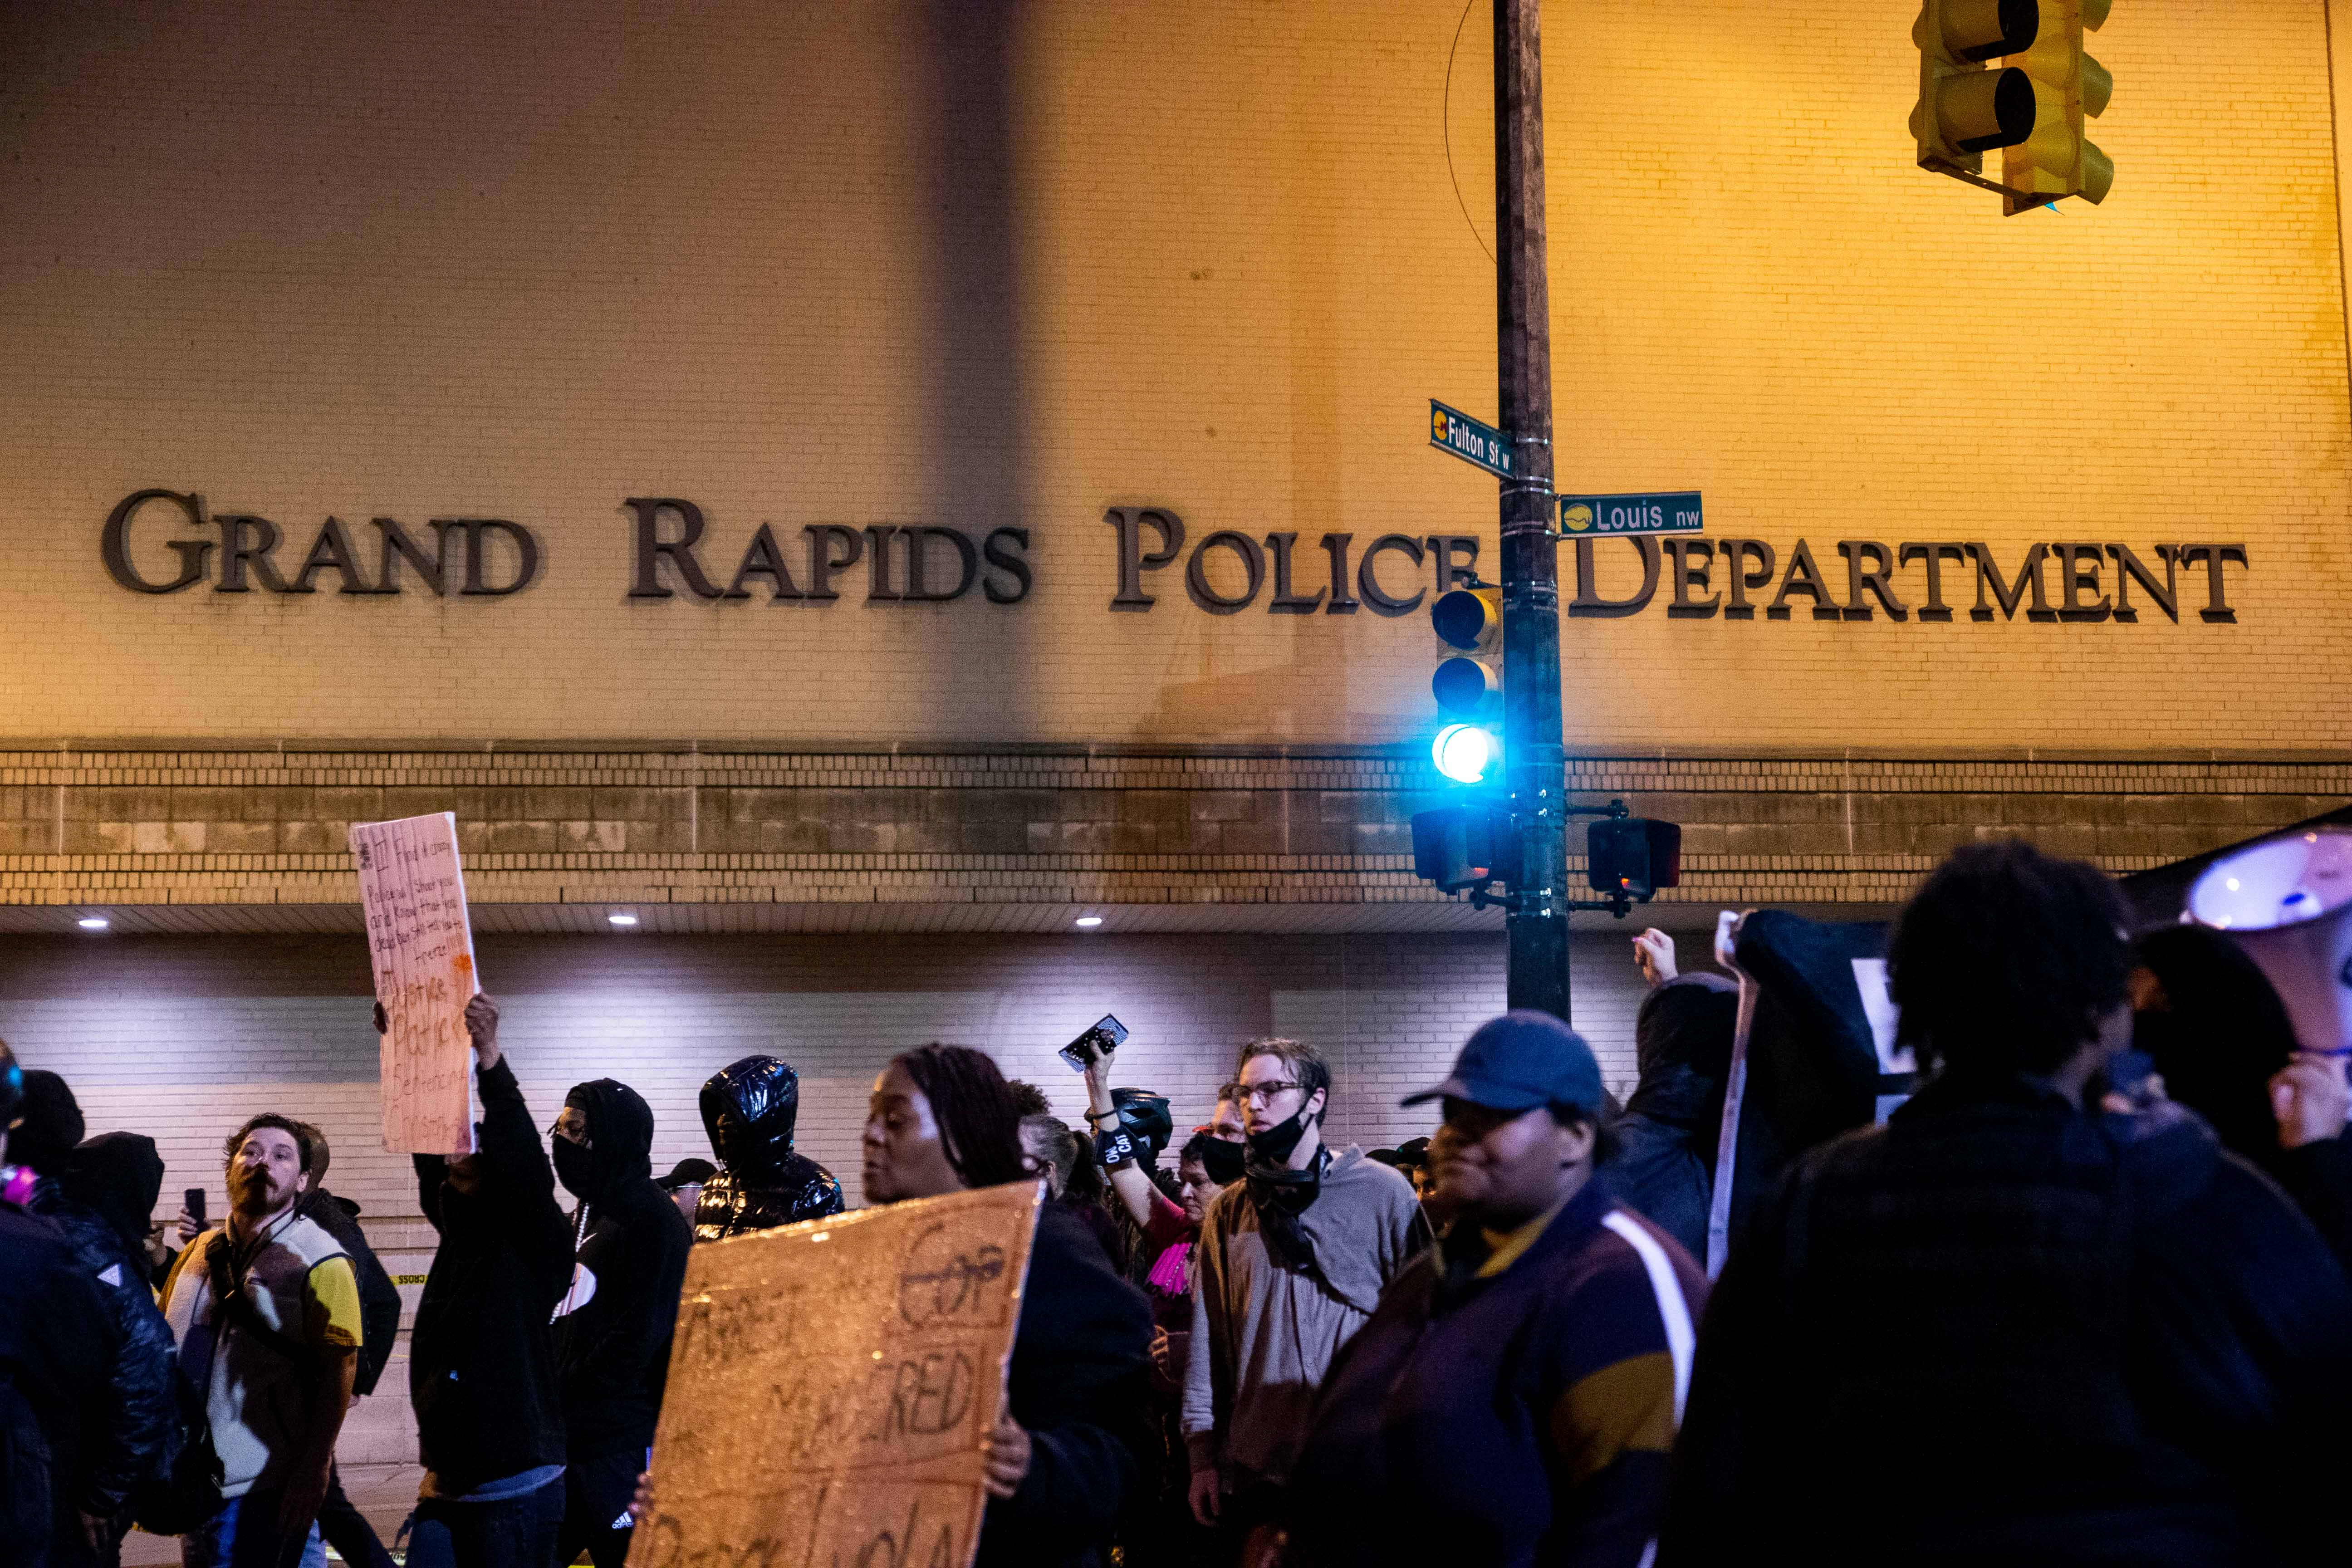 Protesters march around the block surrounding the Grand Rapids Police Department in response to the killing of Patrick Lyoya